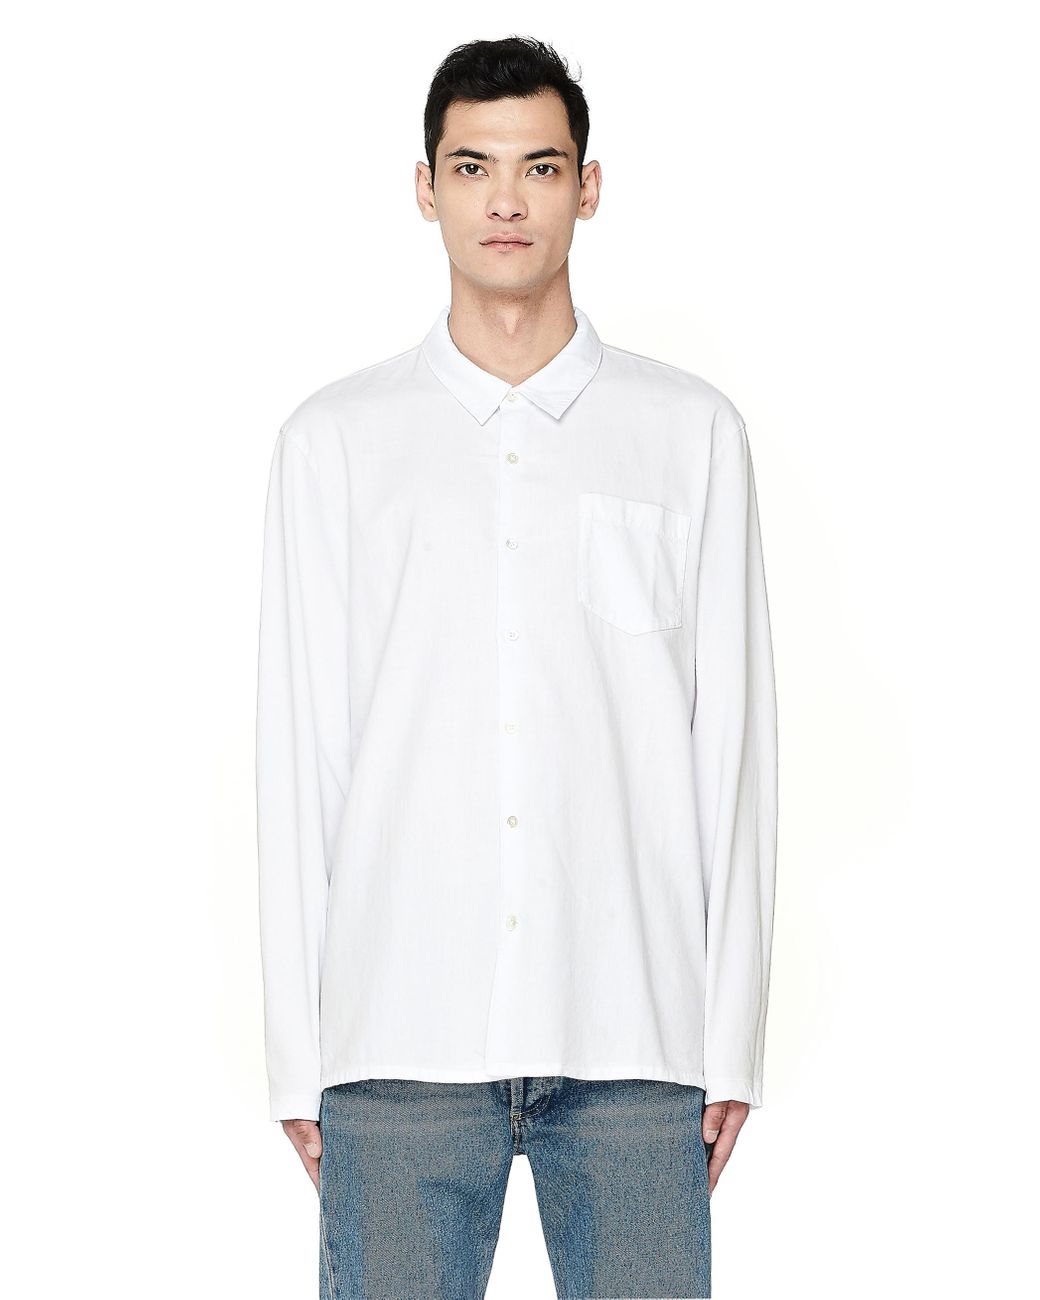 James Perse Cotton Shirt in White for Men - Lyst